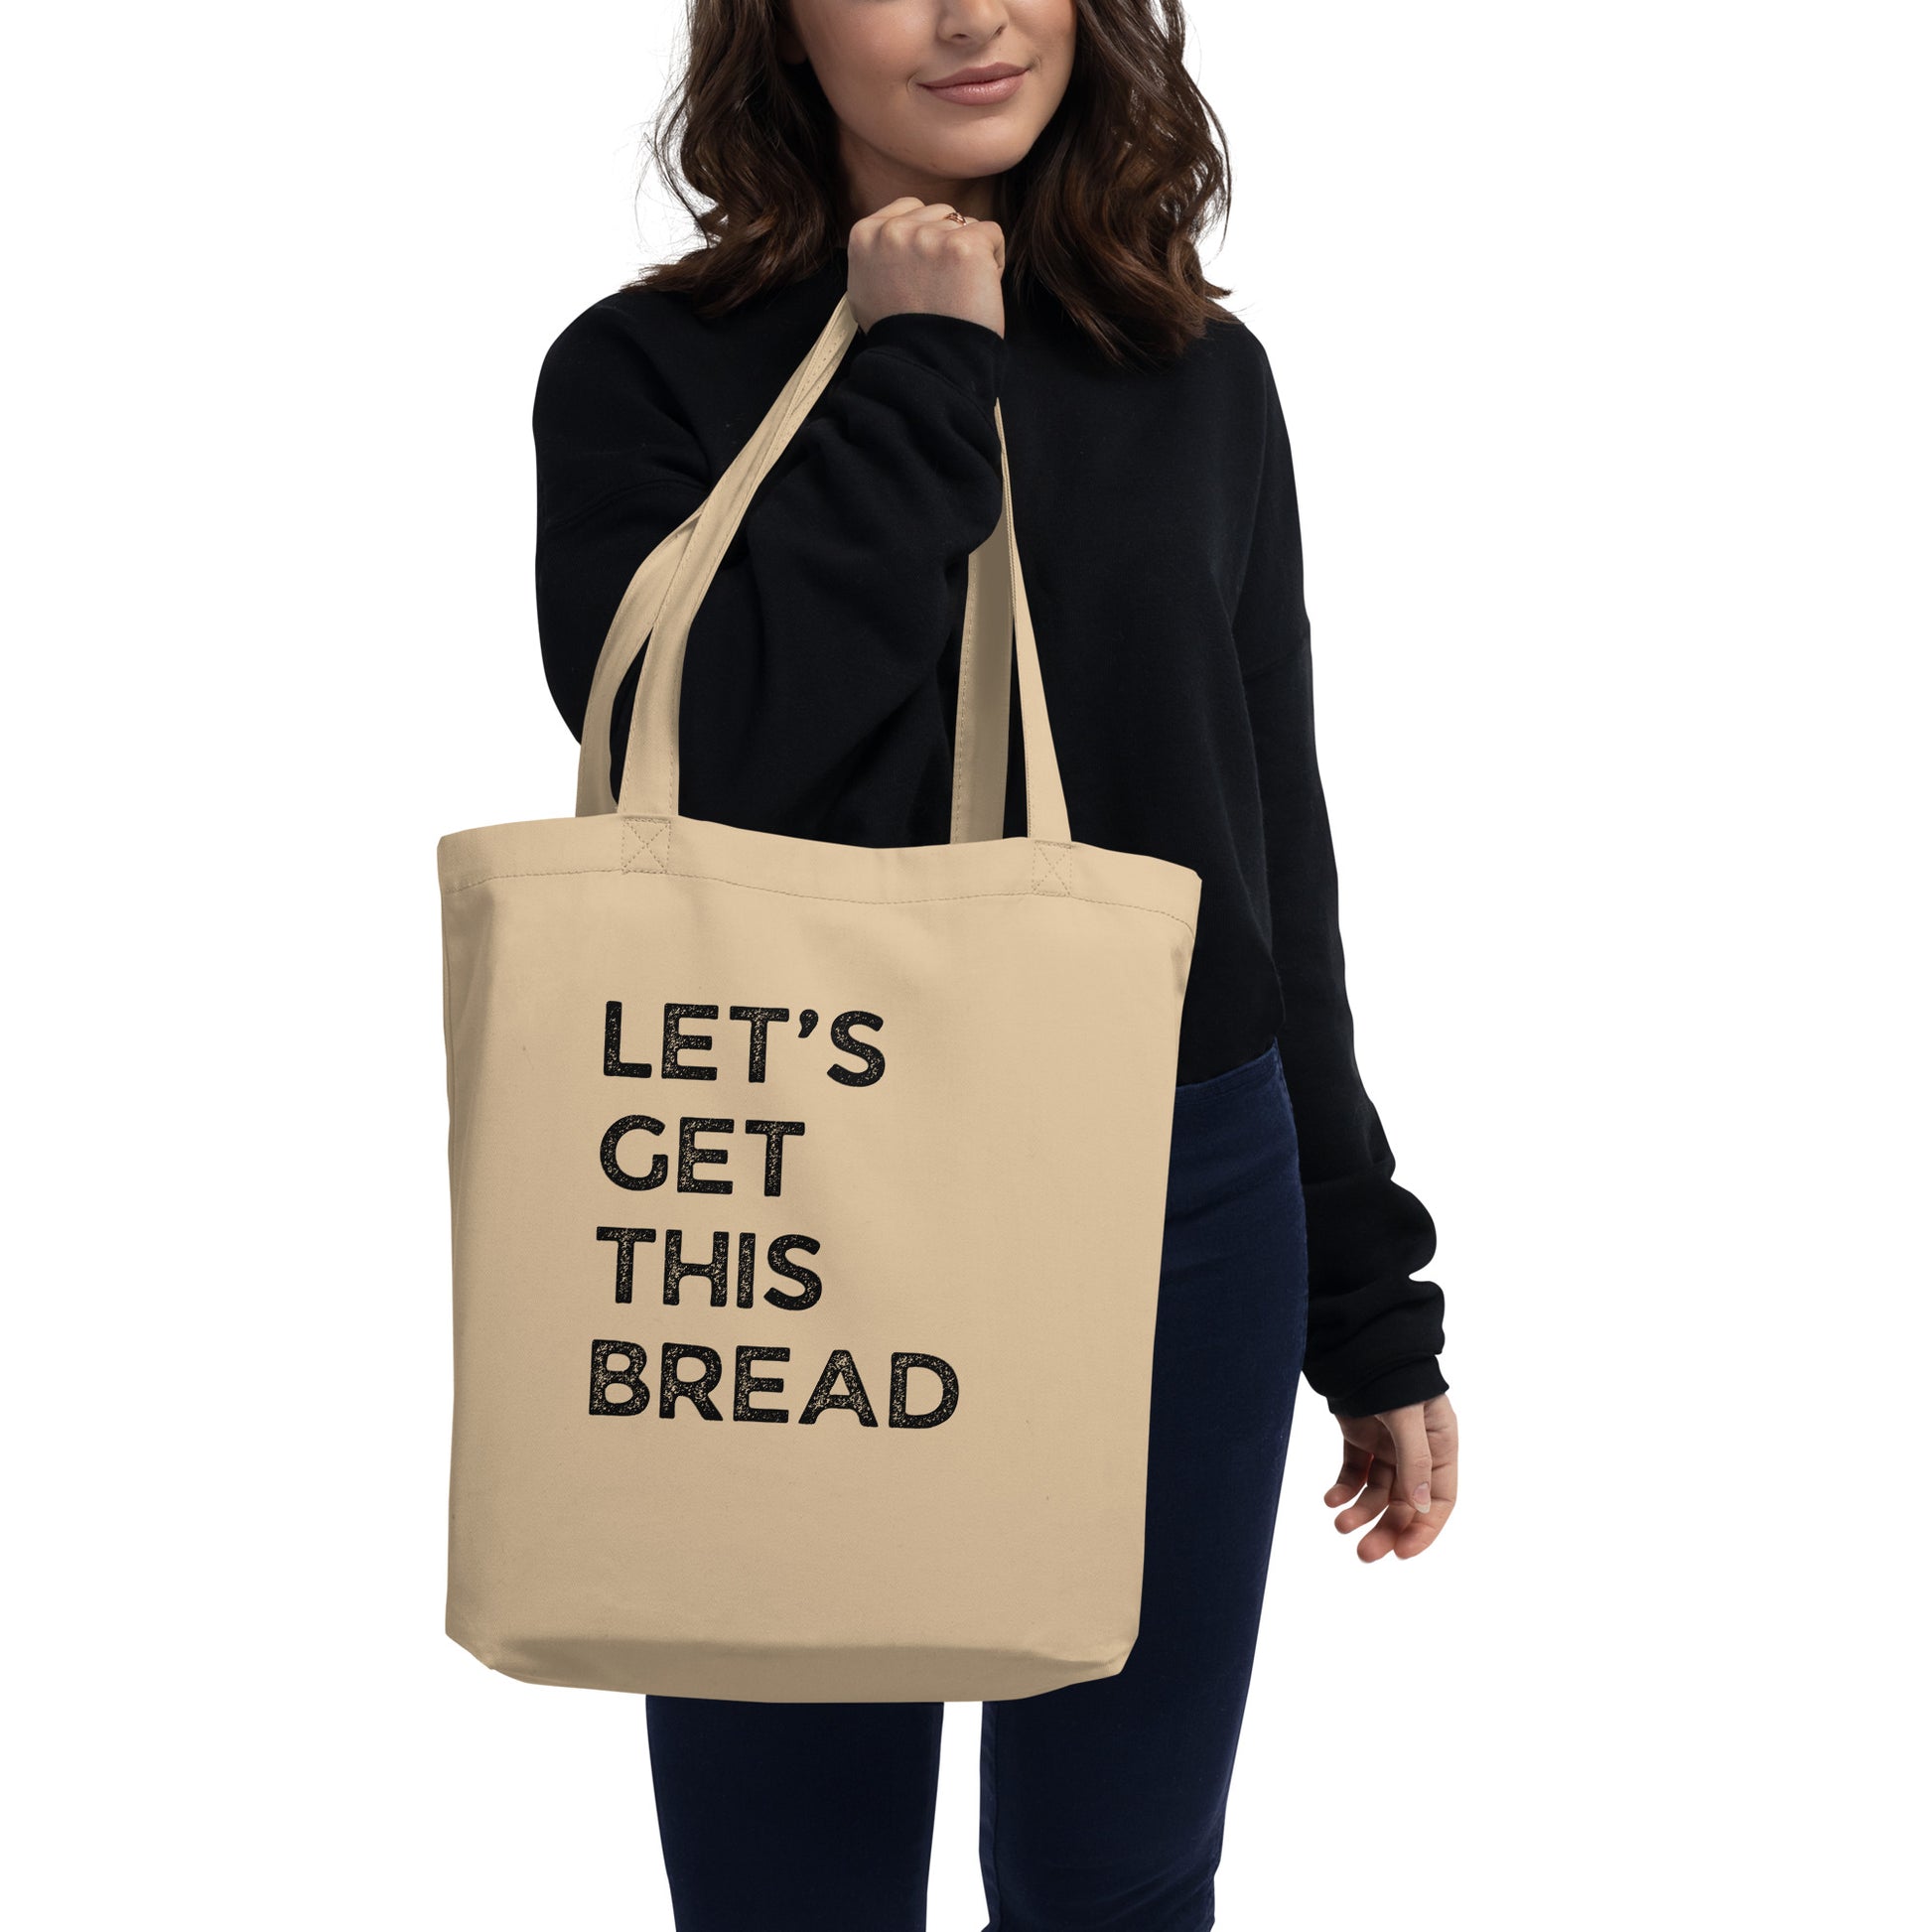 Woman holding Cotton tote bag says Let's Get This Bread